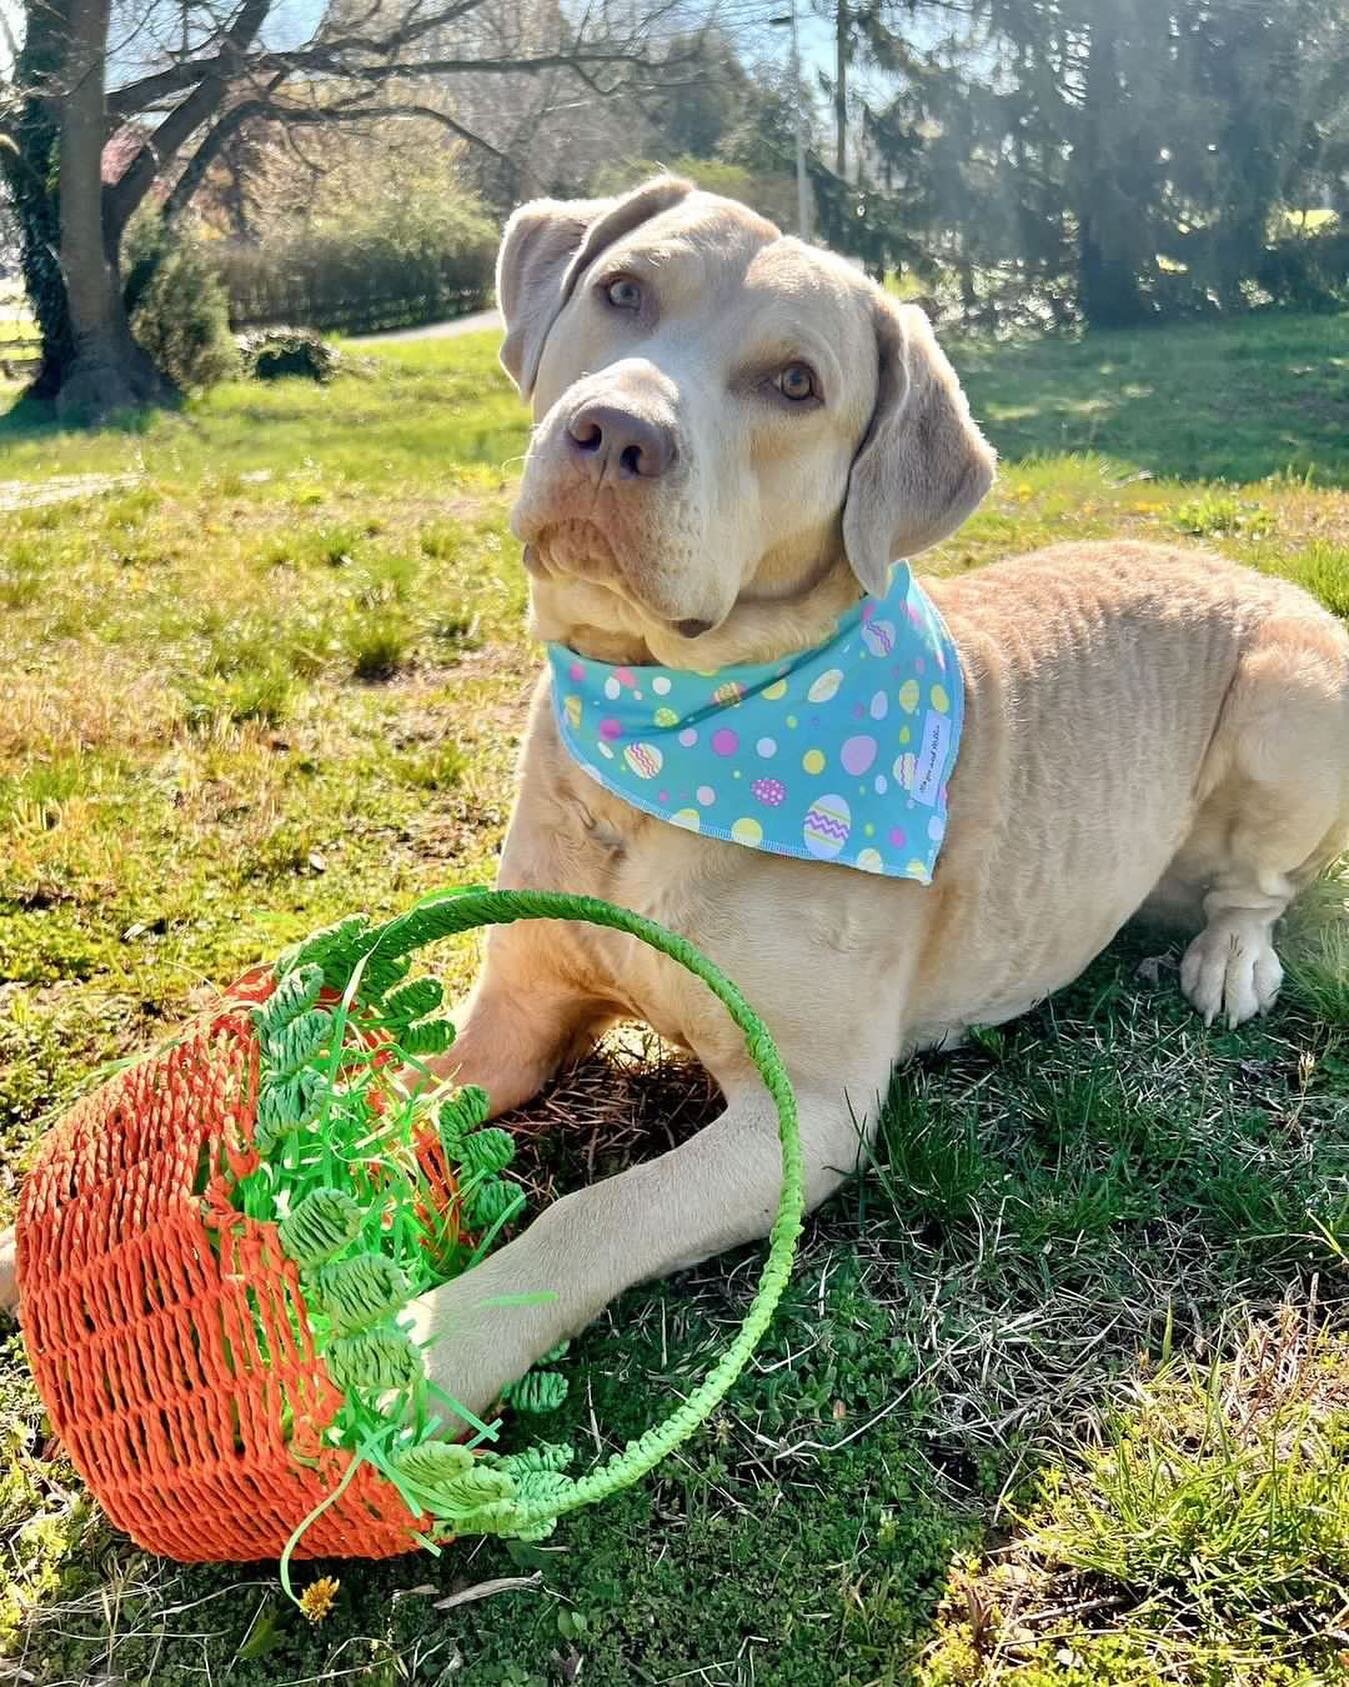 HOPPY EASTER 🐣💗

Did the Easter Bunny bring your pup anything? 

Quint got some new bandanas 😊

We hope you all have an amazing day full of treats and love!

#majorandmillie #shopsmall #dogbandana #smallbusiness #easter